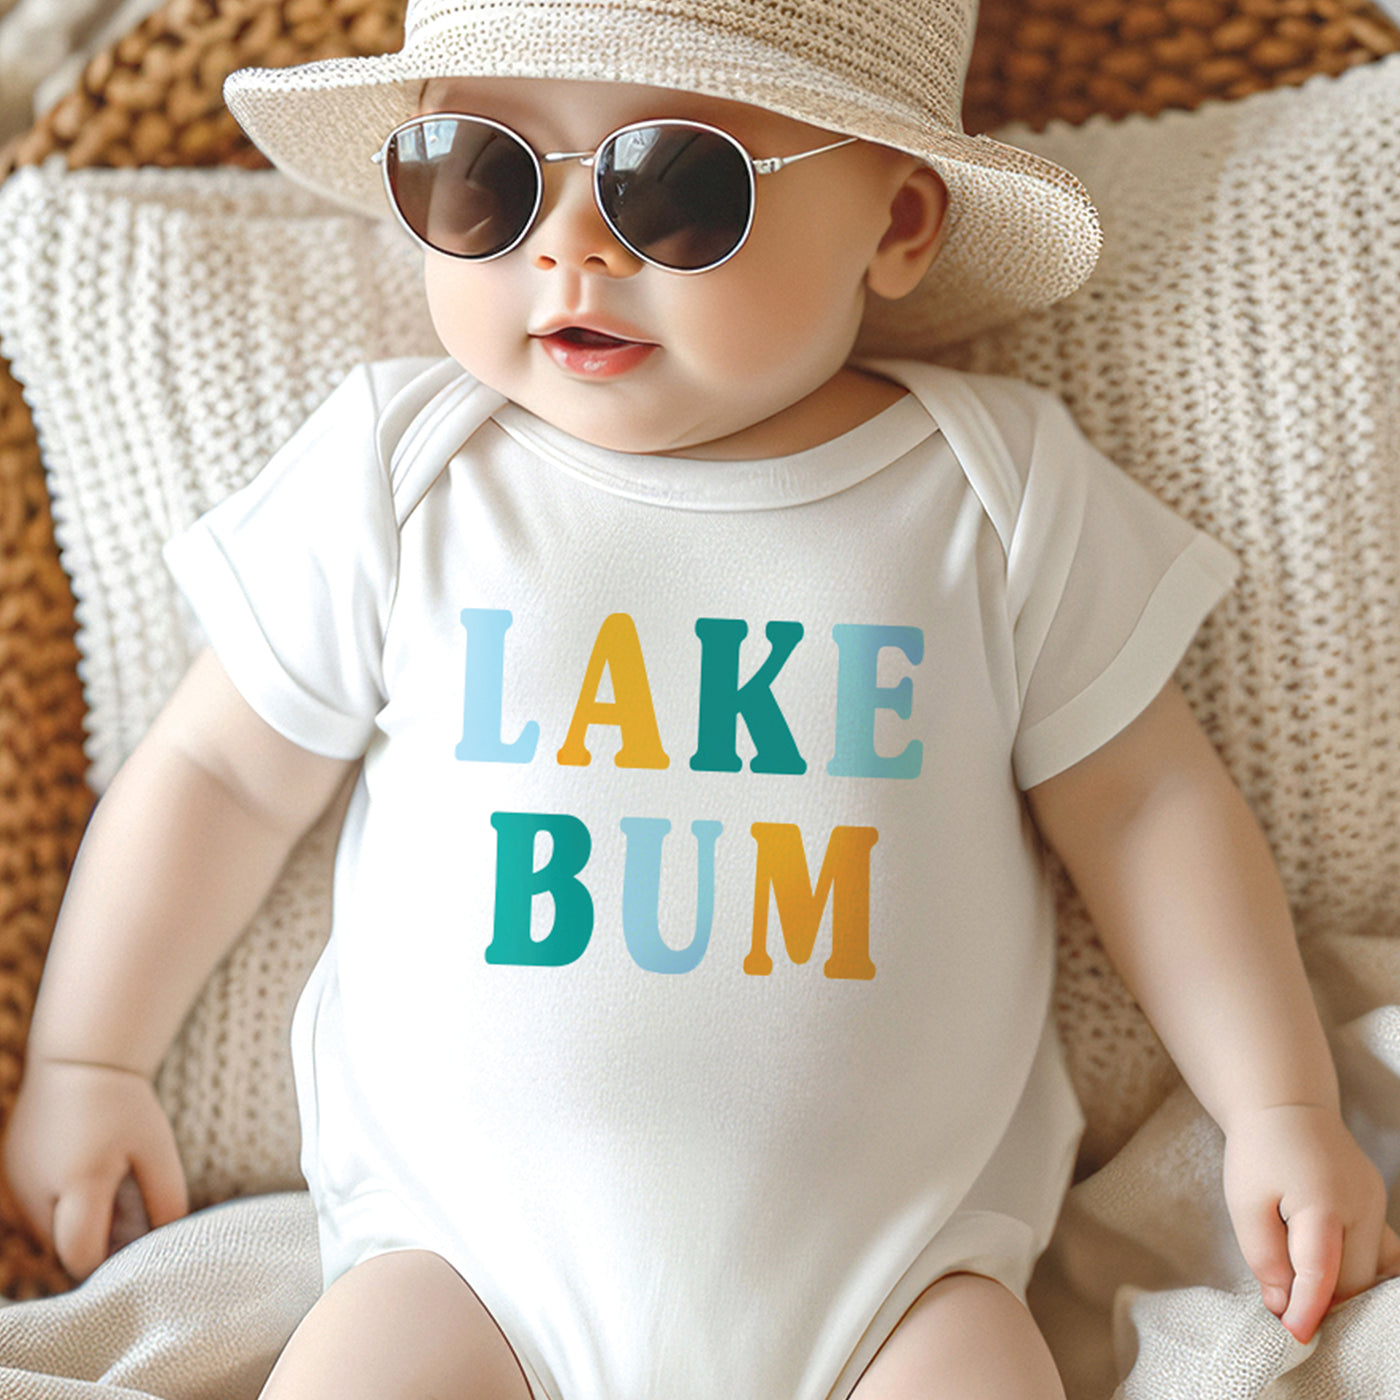 little baby wearing a hat, sunglasses and white onesie with blue, mustard yellow and teal LAKE BUM text print